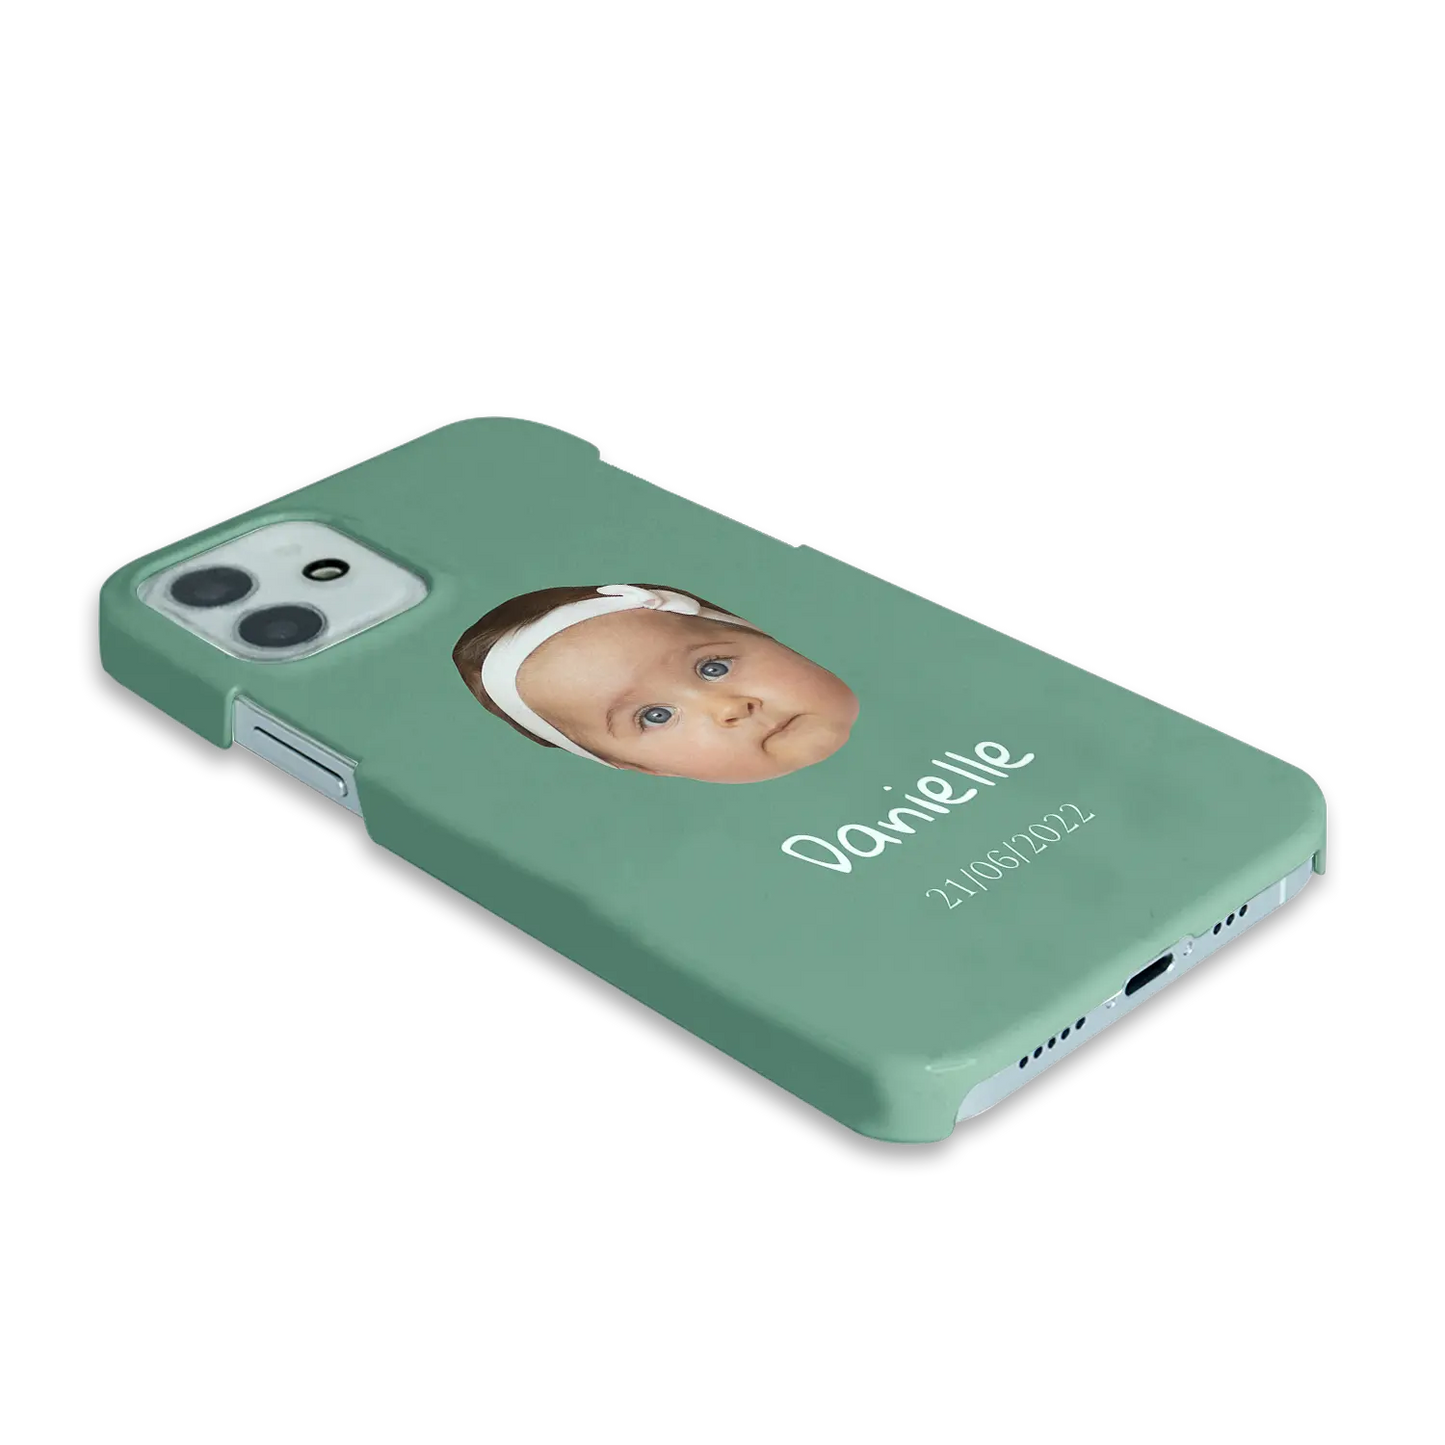 Let’s Face It - Personalised Galaxy S Case